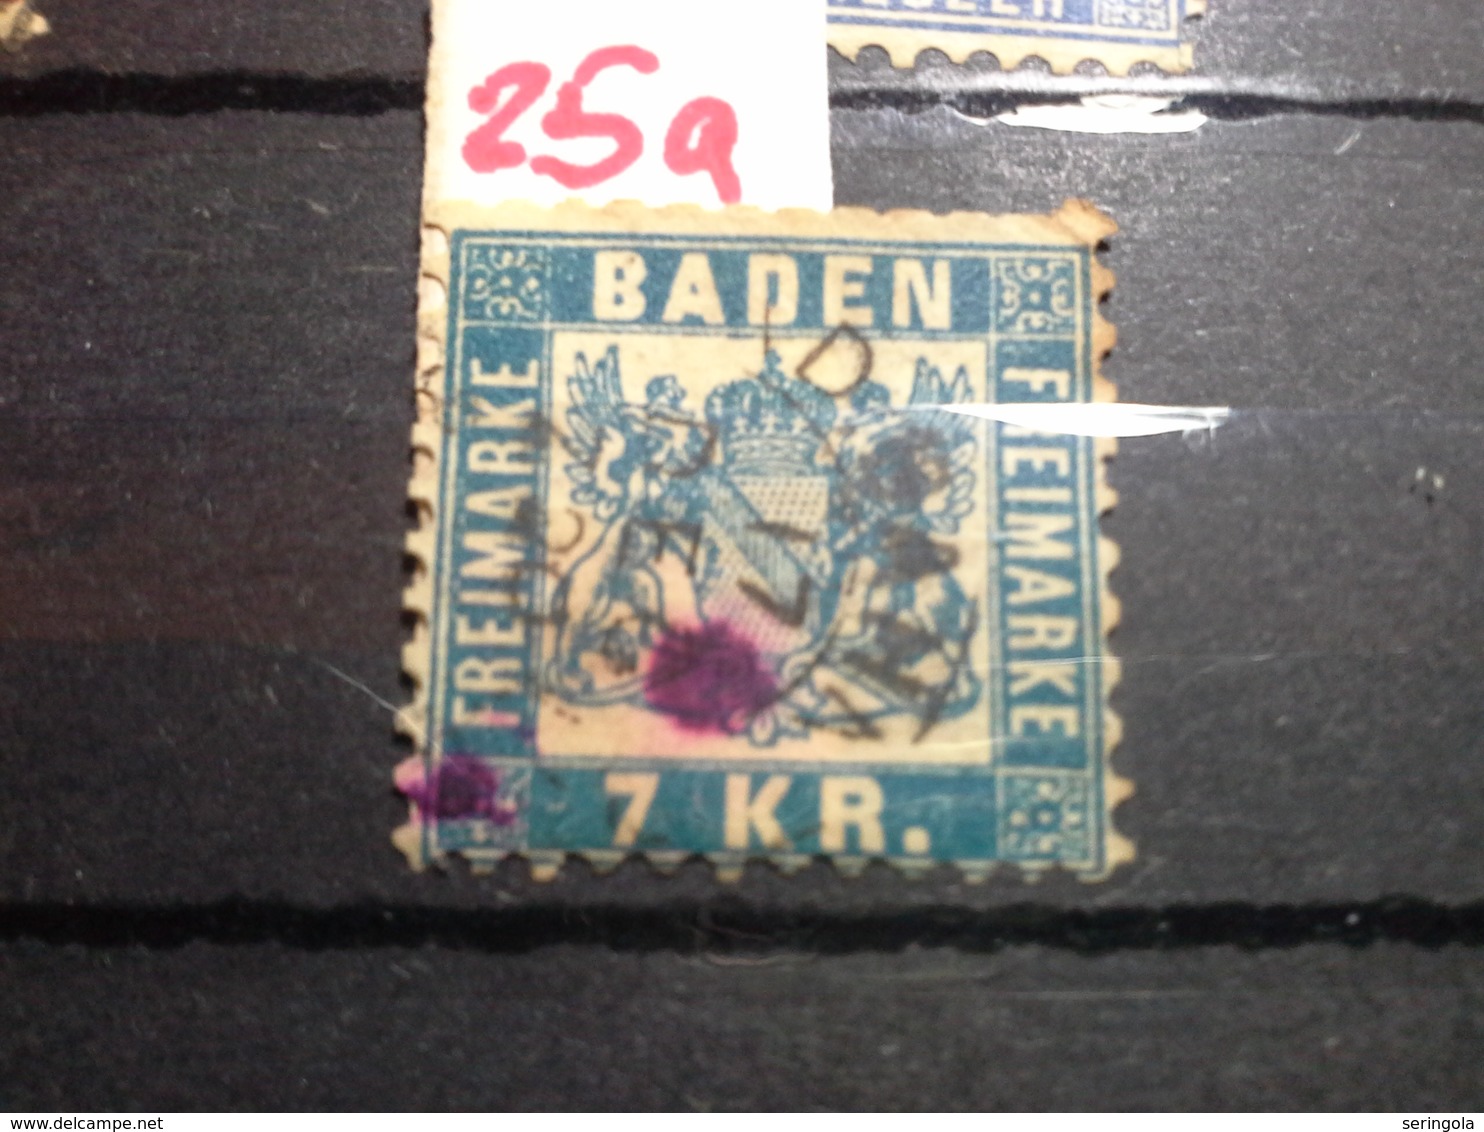 Lot stamps Germany states Baden